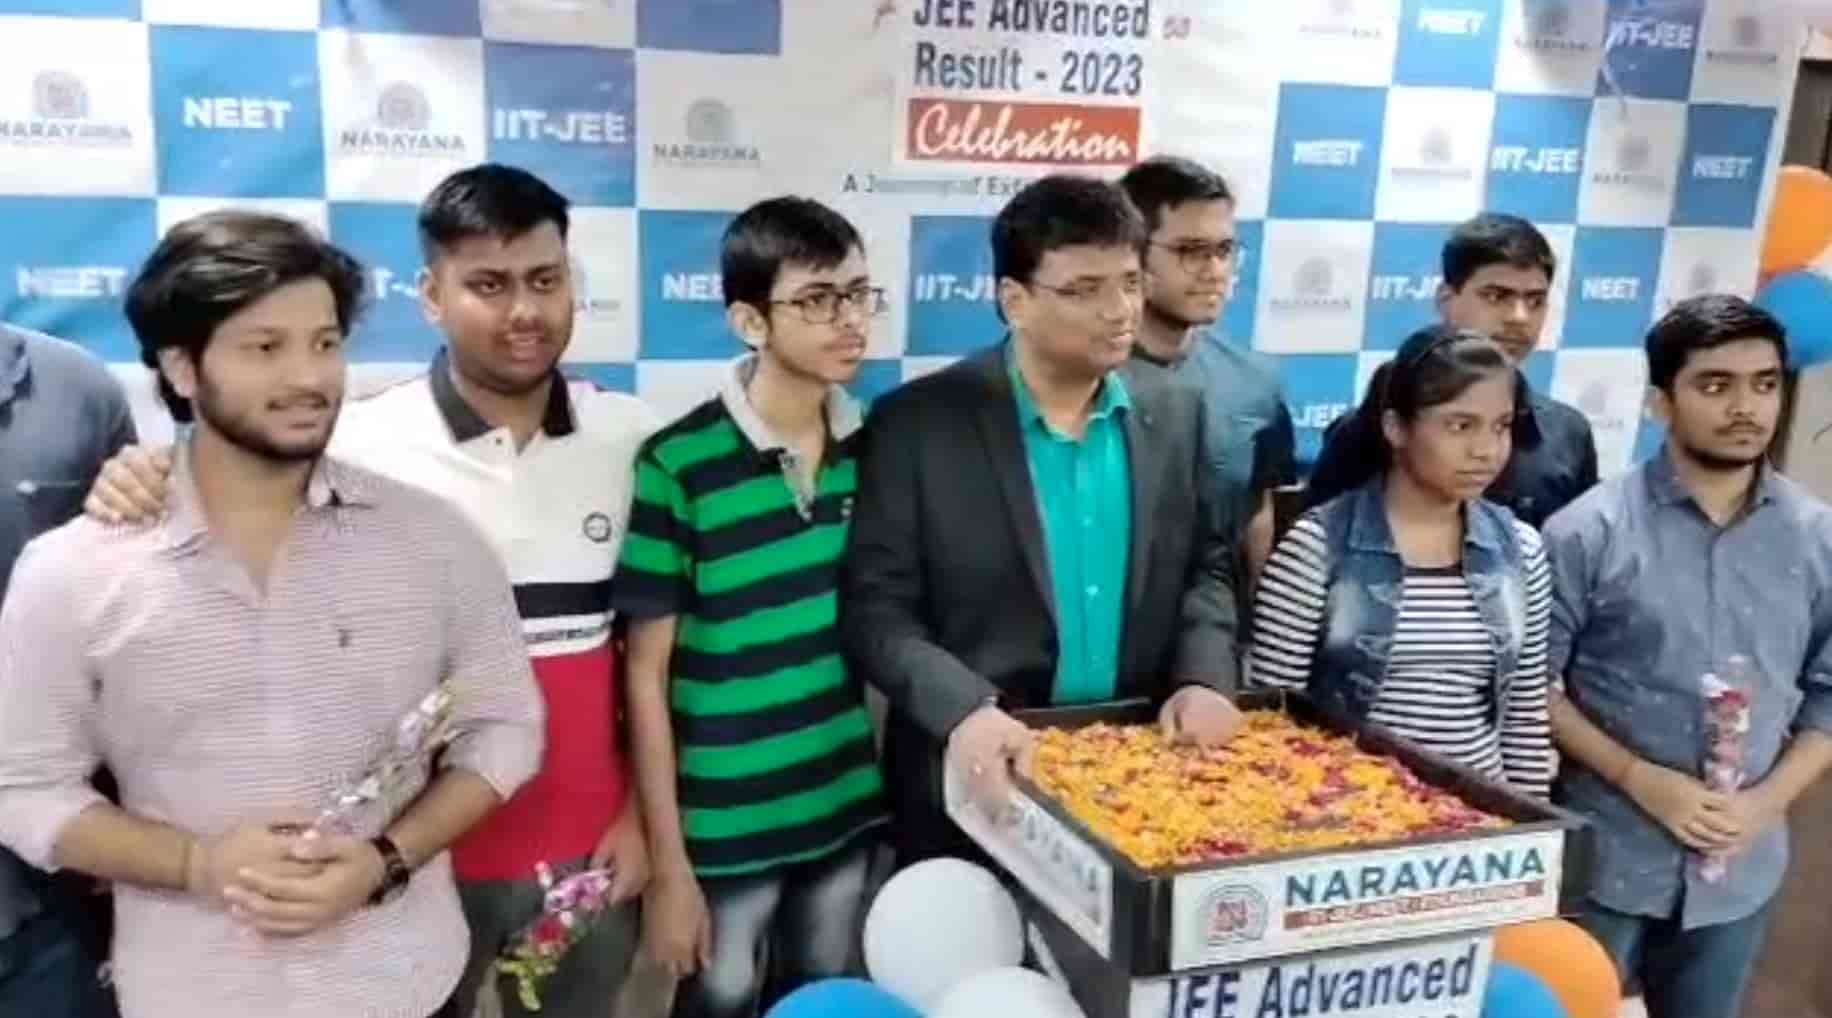 39 students from Narayana Institute, Jamshedpur, taste success in JEE Advanced, with the director expressing his congratulations to all.